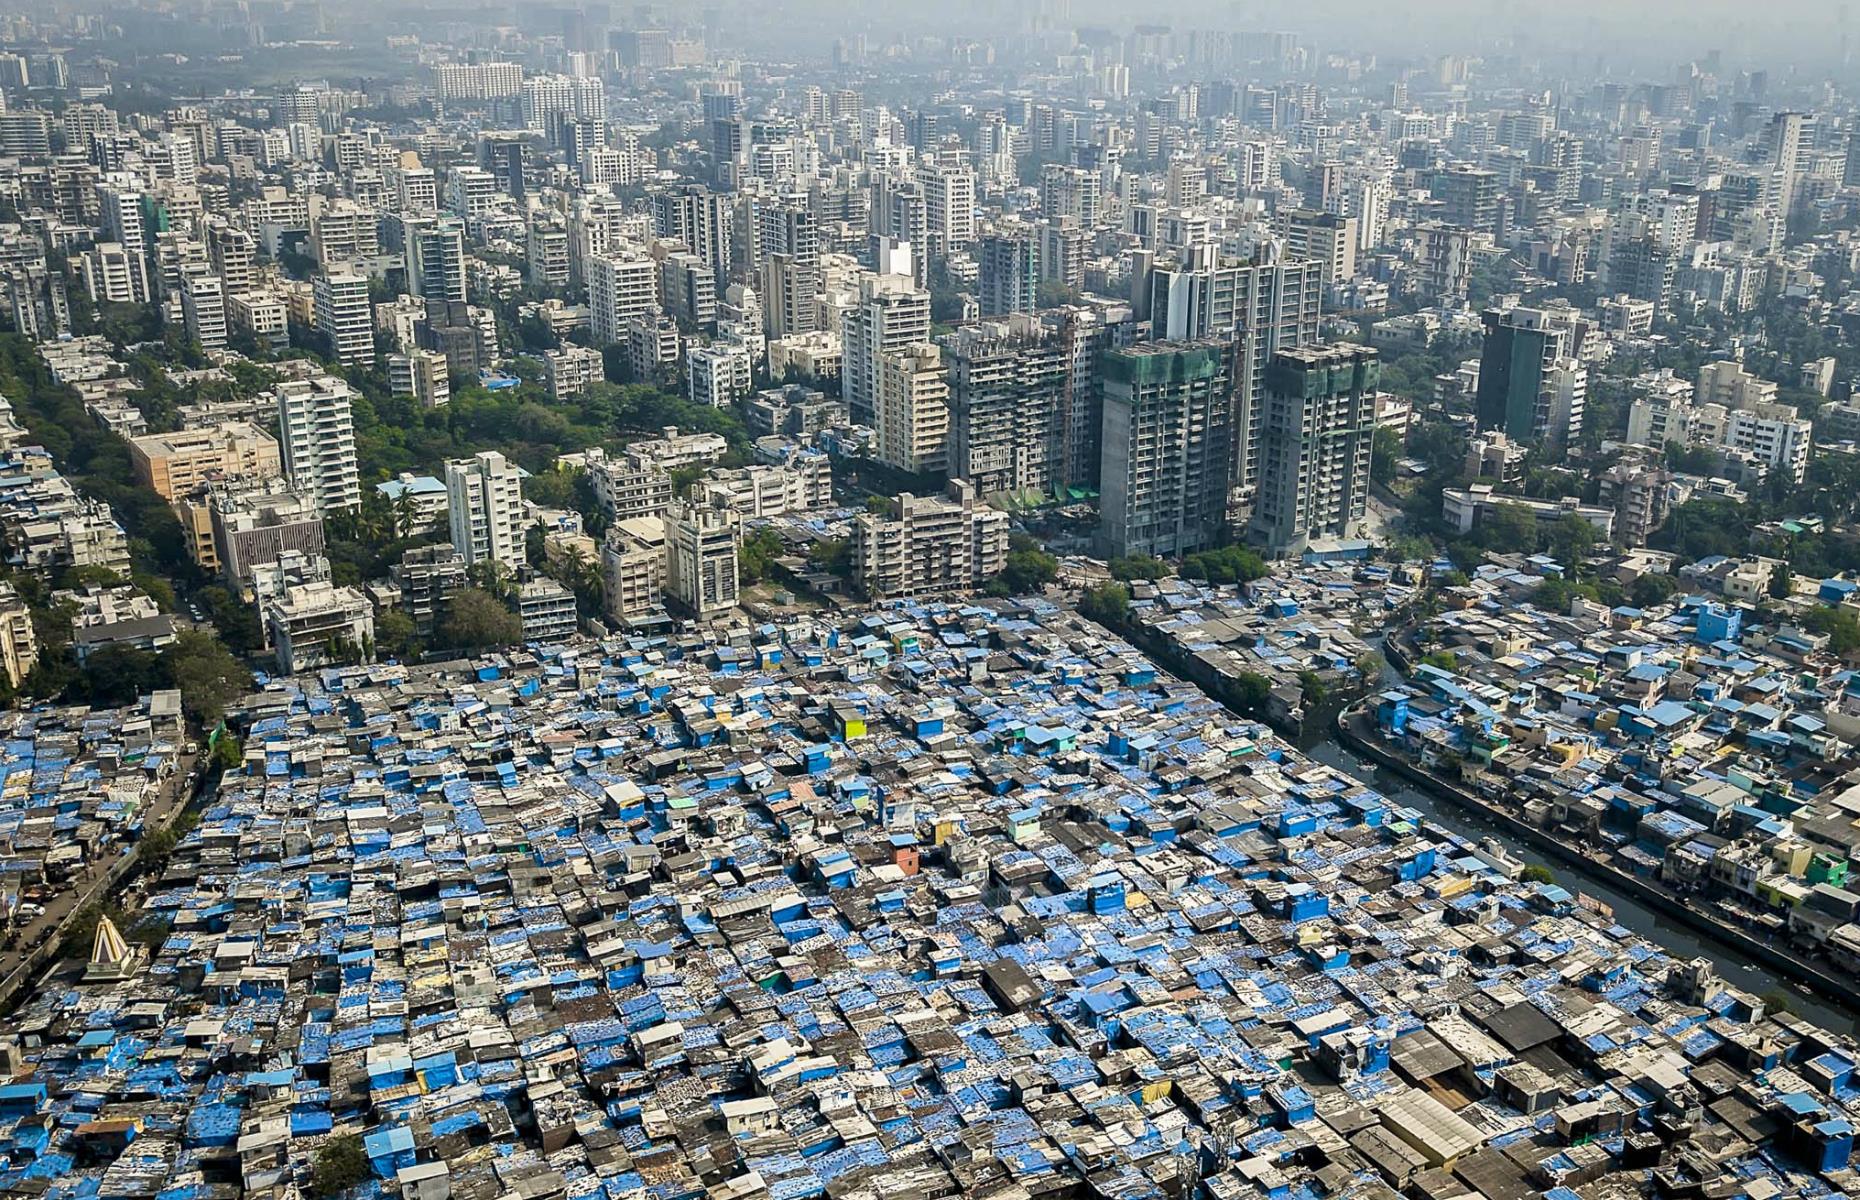 <p>Mumbai's Dharavi slum (pictured) is the largest in Mumbai, and the second largest in Asia, with an estimated one million inhabitants. What's even more shocking? The slum, which was the setting for the film <em>Slumdog Millionaire</em>, has a high literacy rate of 69%, making it the most literate slum in the country. This is due to India's failing economy, which has the worst levels of unemployment in 45 years according to a government survey, with many highly-educated people unable to secure work.</p>